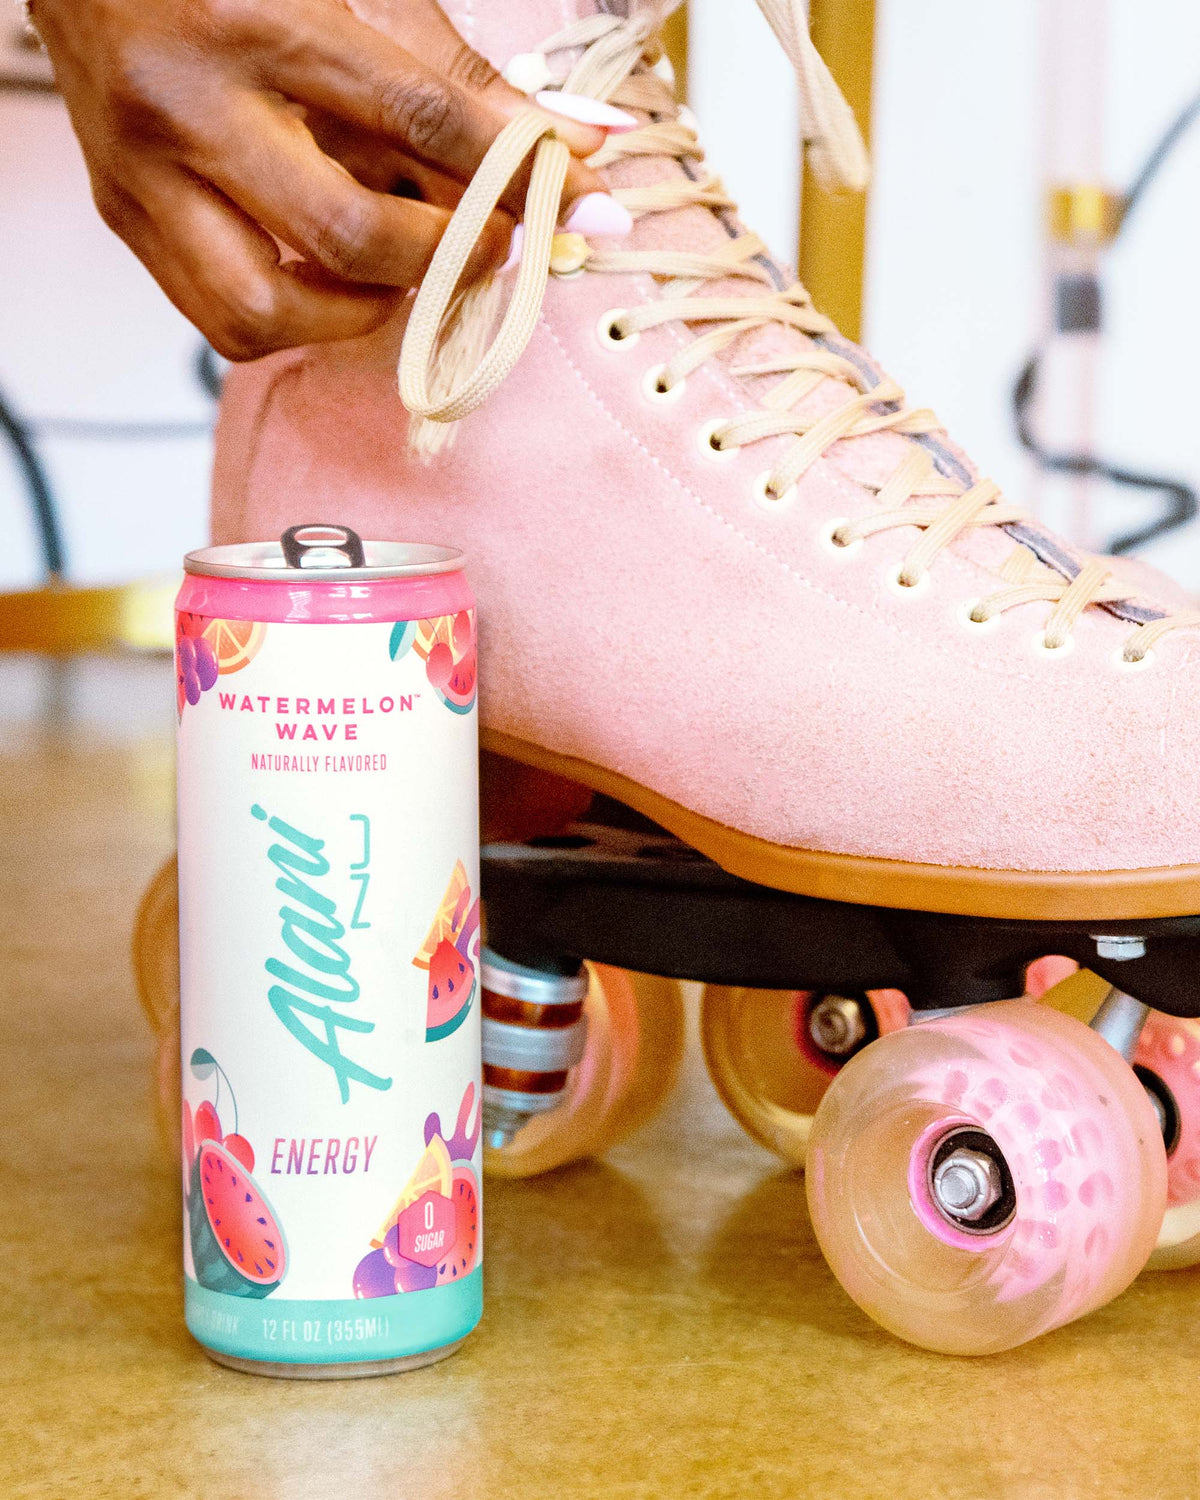 A pink roller skate with a can of Alani Nu&#39;s Watermelon Wave Energy Drink.